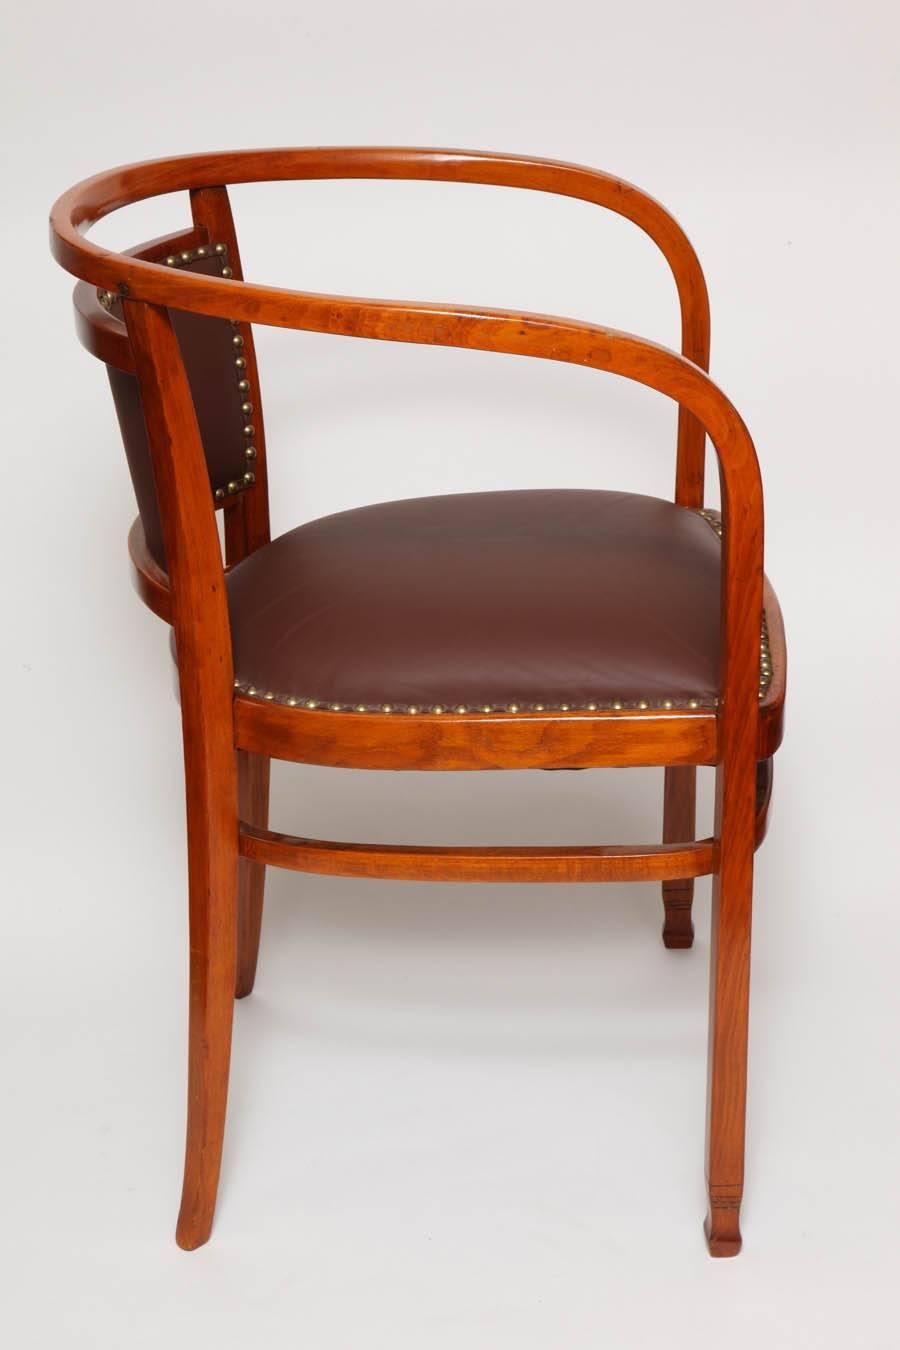 Otto Wagner Secessionist Bentwood and Leather Armchair, J&J Kohn, 1906 In Excellent Condition For Sale In New York, NY